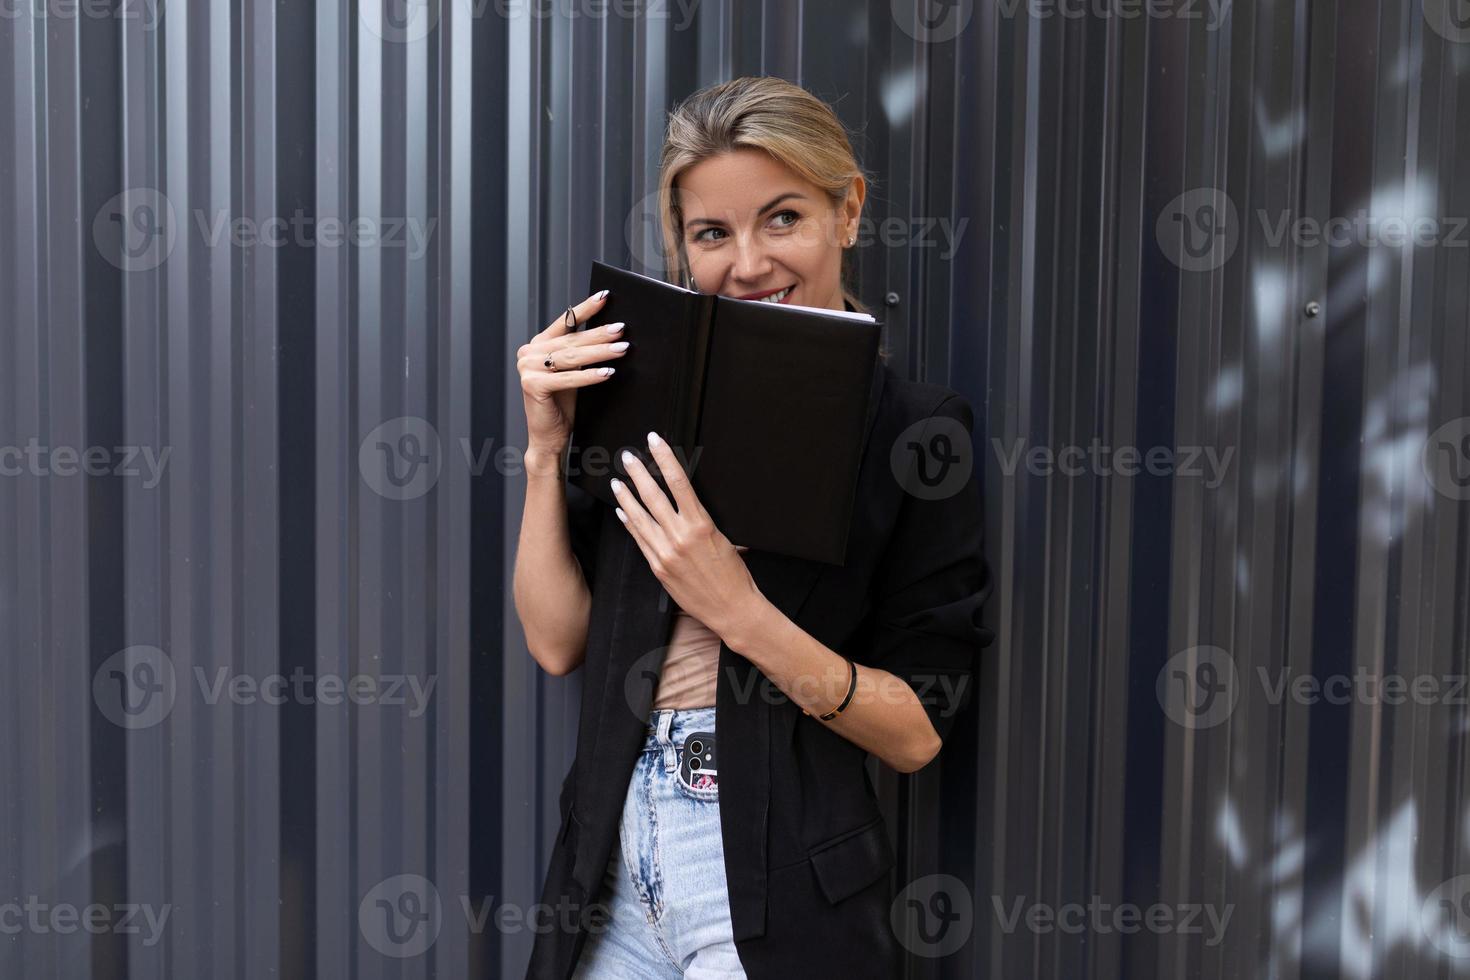 office worker middle-aged woman with a smile holding a notebook in her hands looking at the camera photo